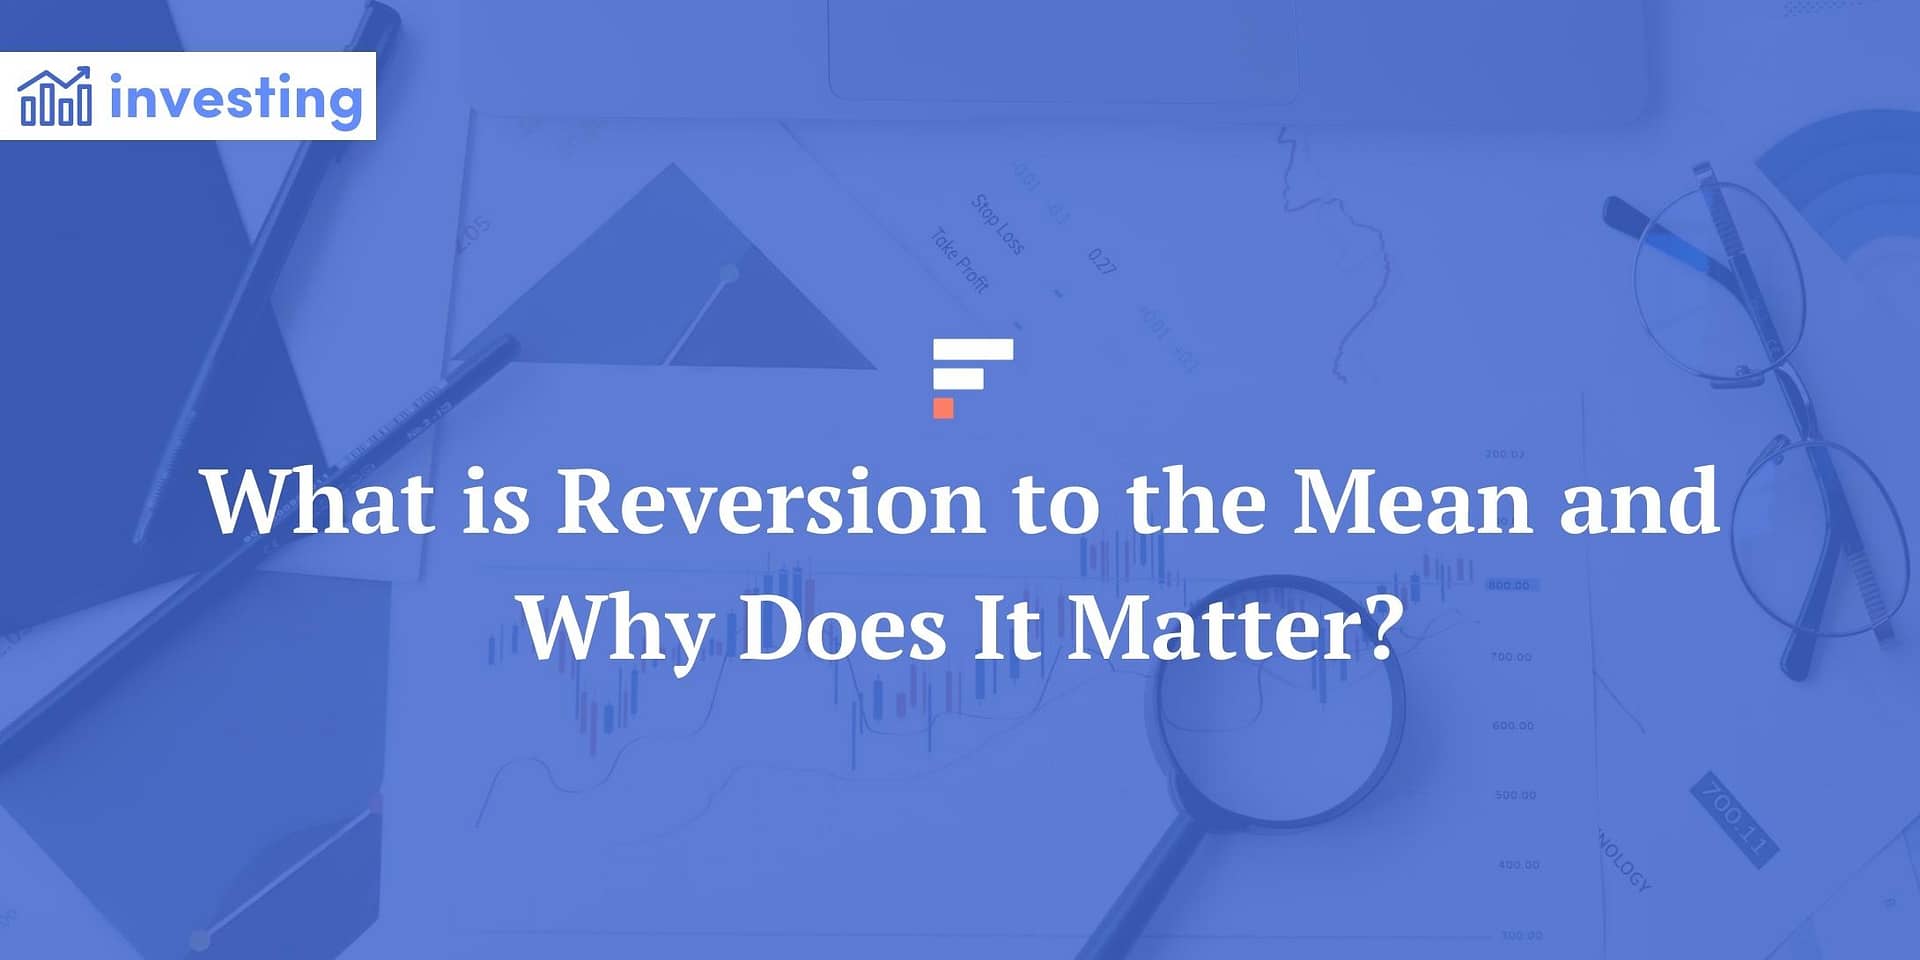 What is Reversion to the Mean and Why Does It Matter